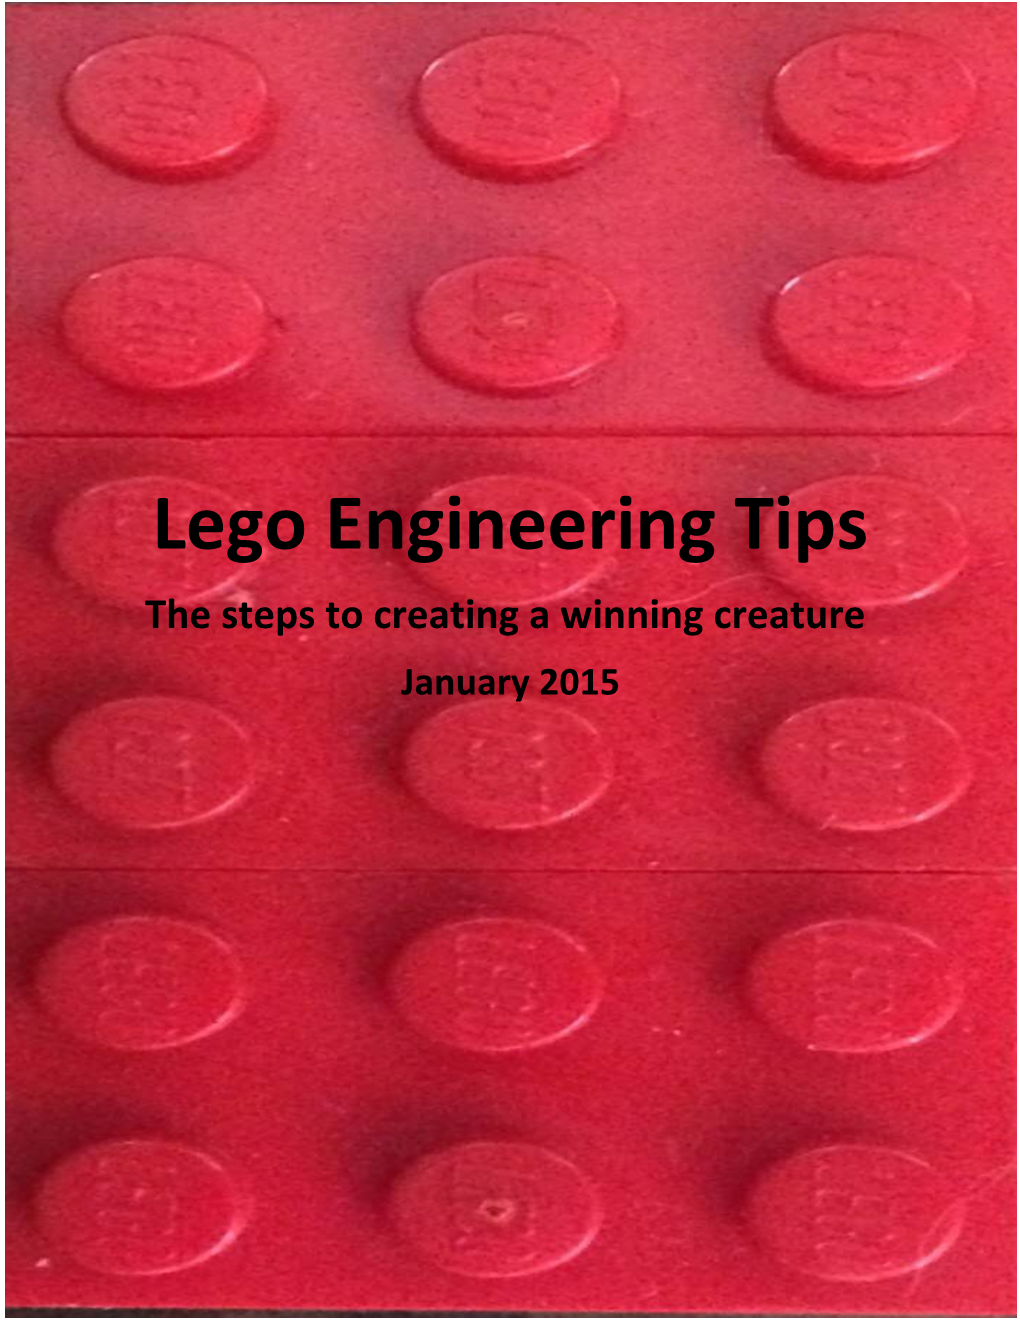 The Steps to Creating a Winning Creature